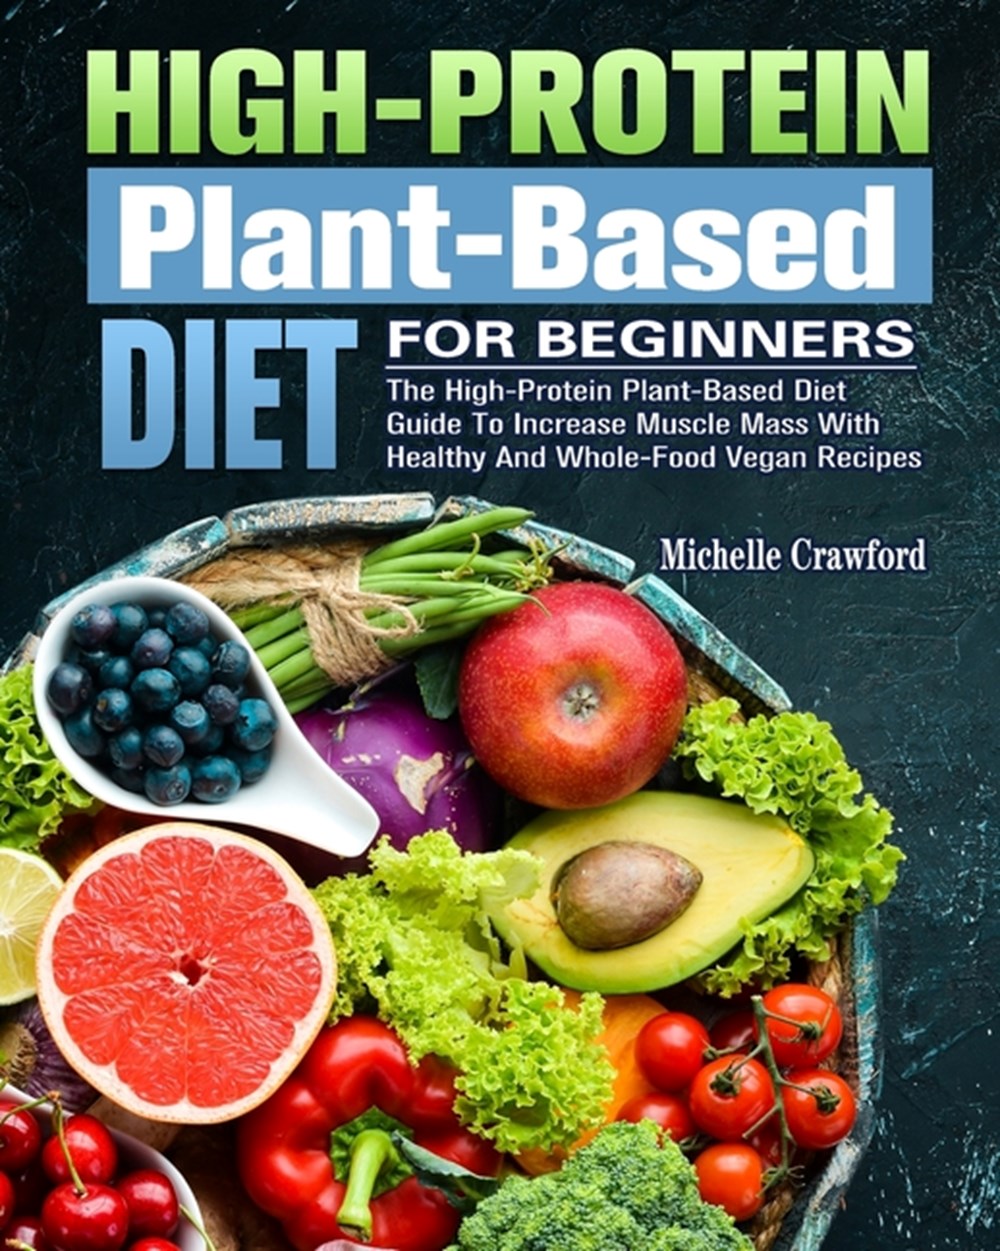 High-Protein Plant-Based Diet For Beginners The High-Protein Plant-Based Diet Guide To Increase Musc